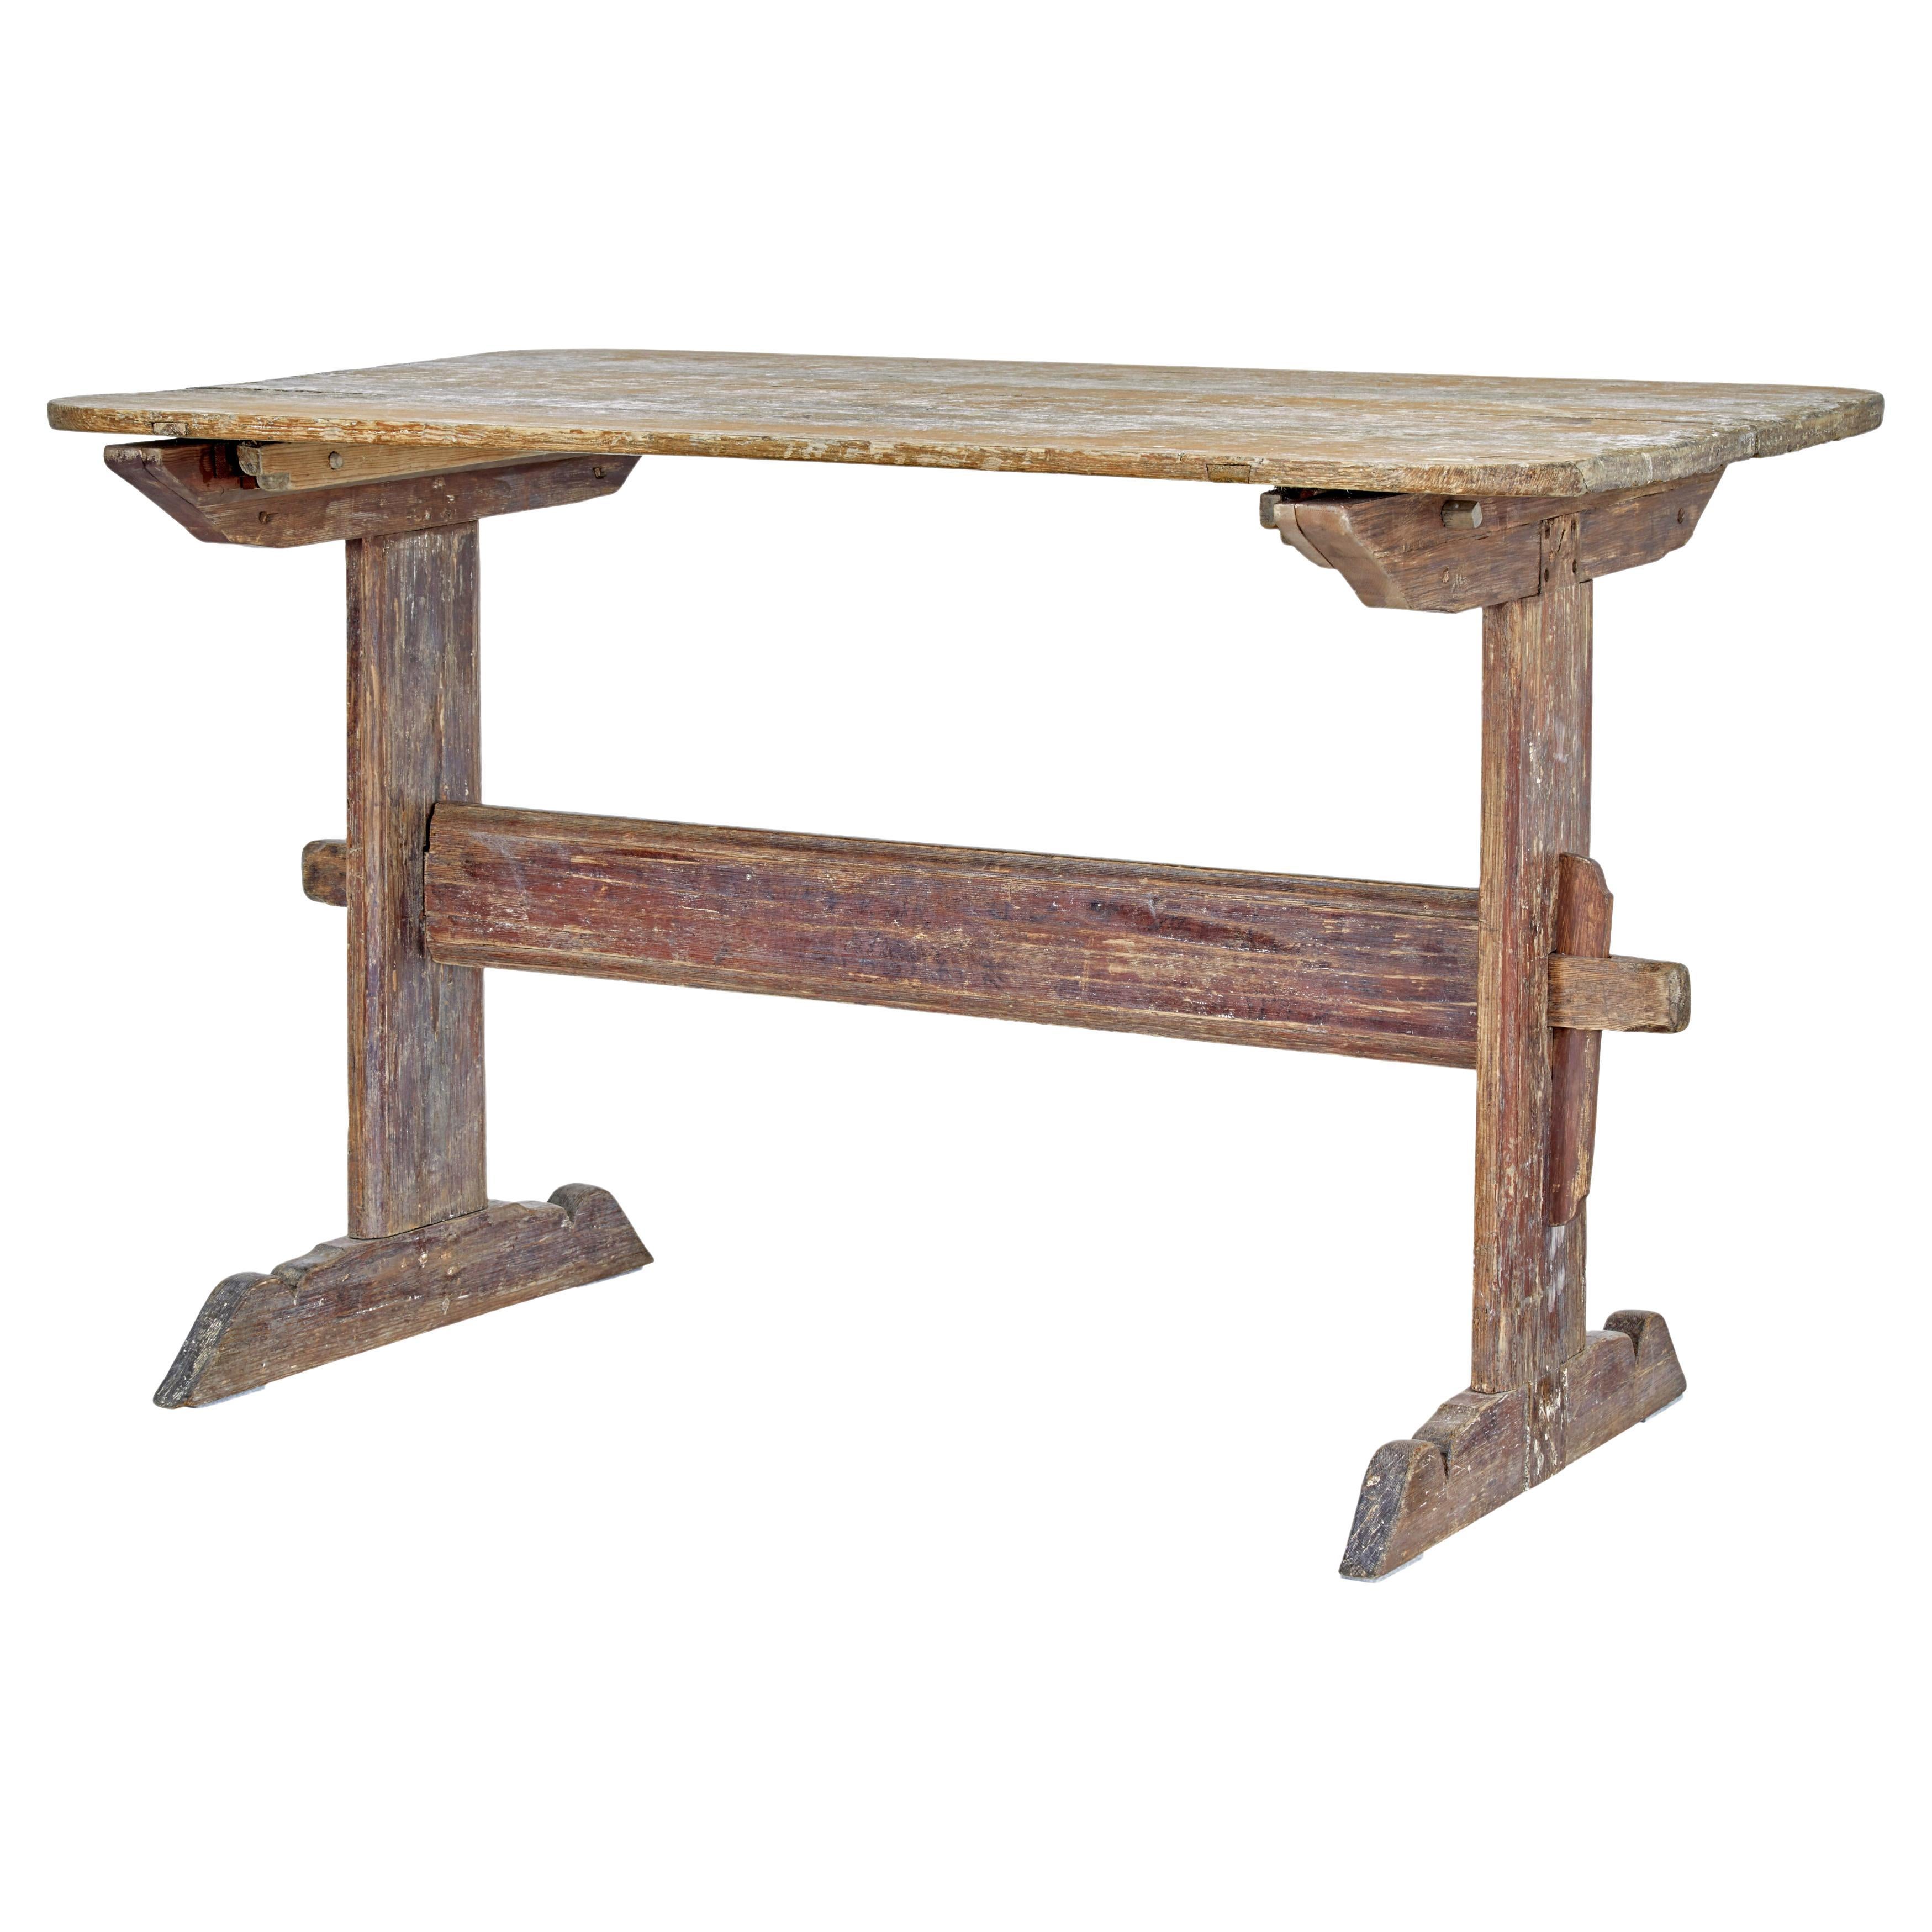 19th century rustic Swedish painted trestle table For Sale